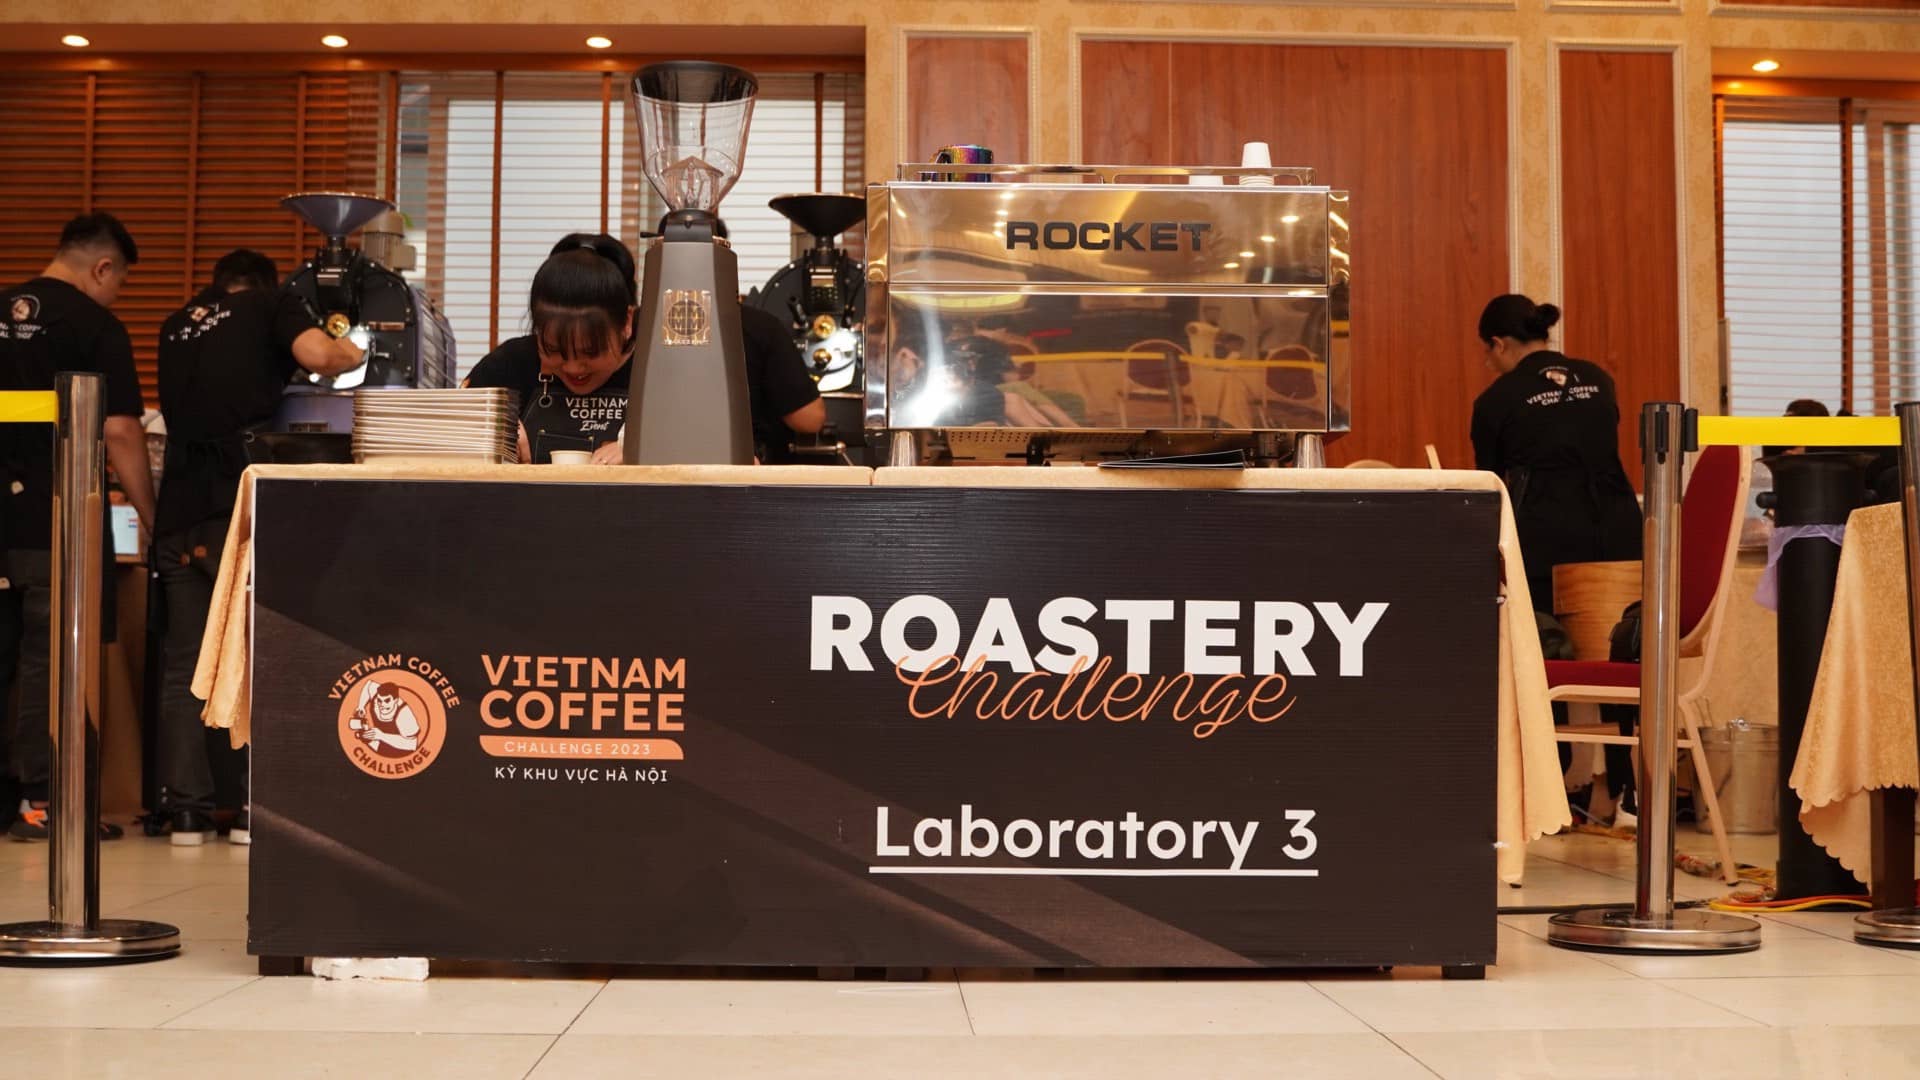 The exclusive sponsor of roasting machines for the Roastery Challenge category of the Vietnam Coffee Challenge 2023 in Hanoi